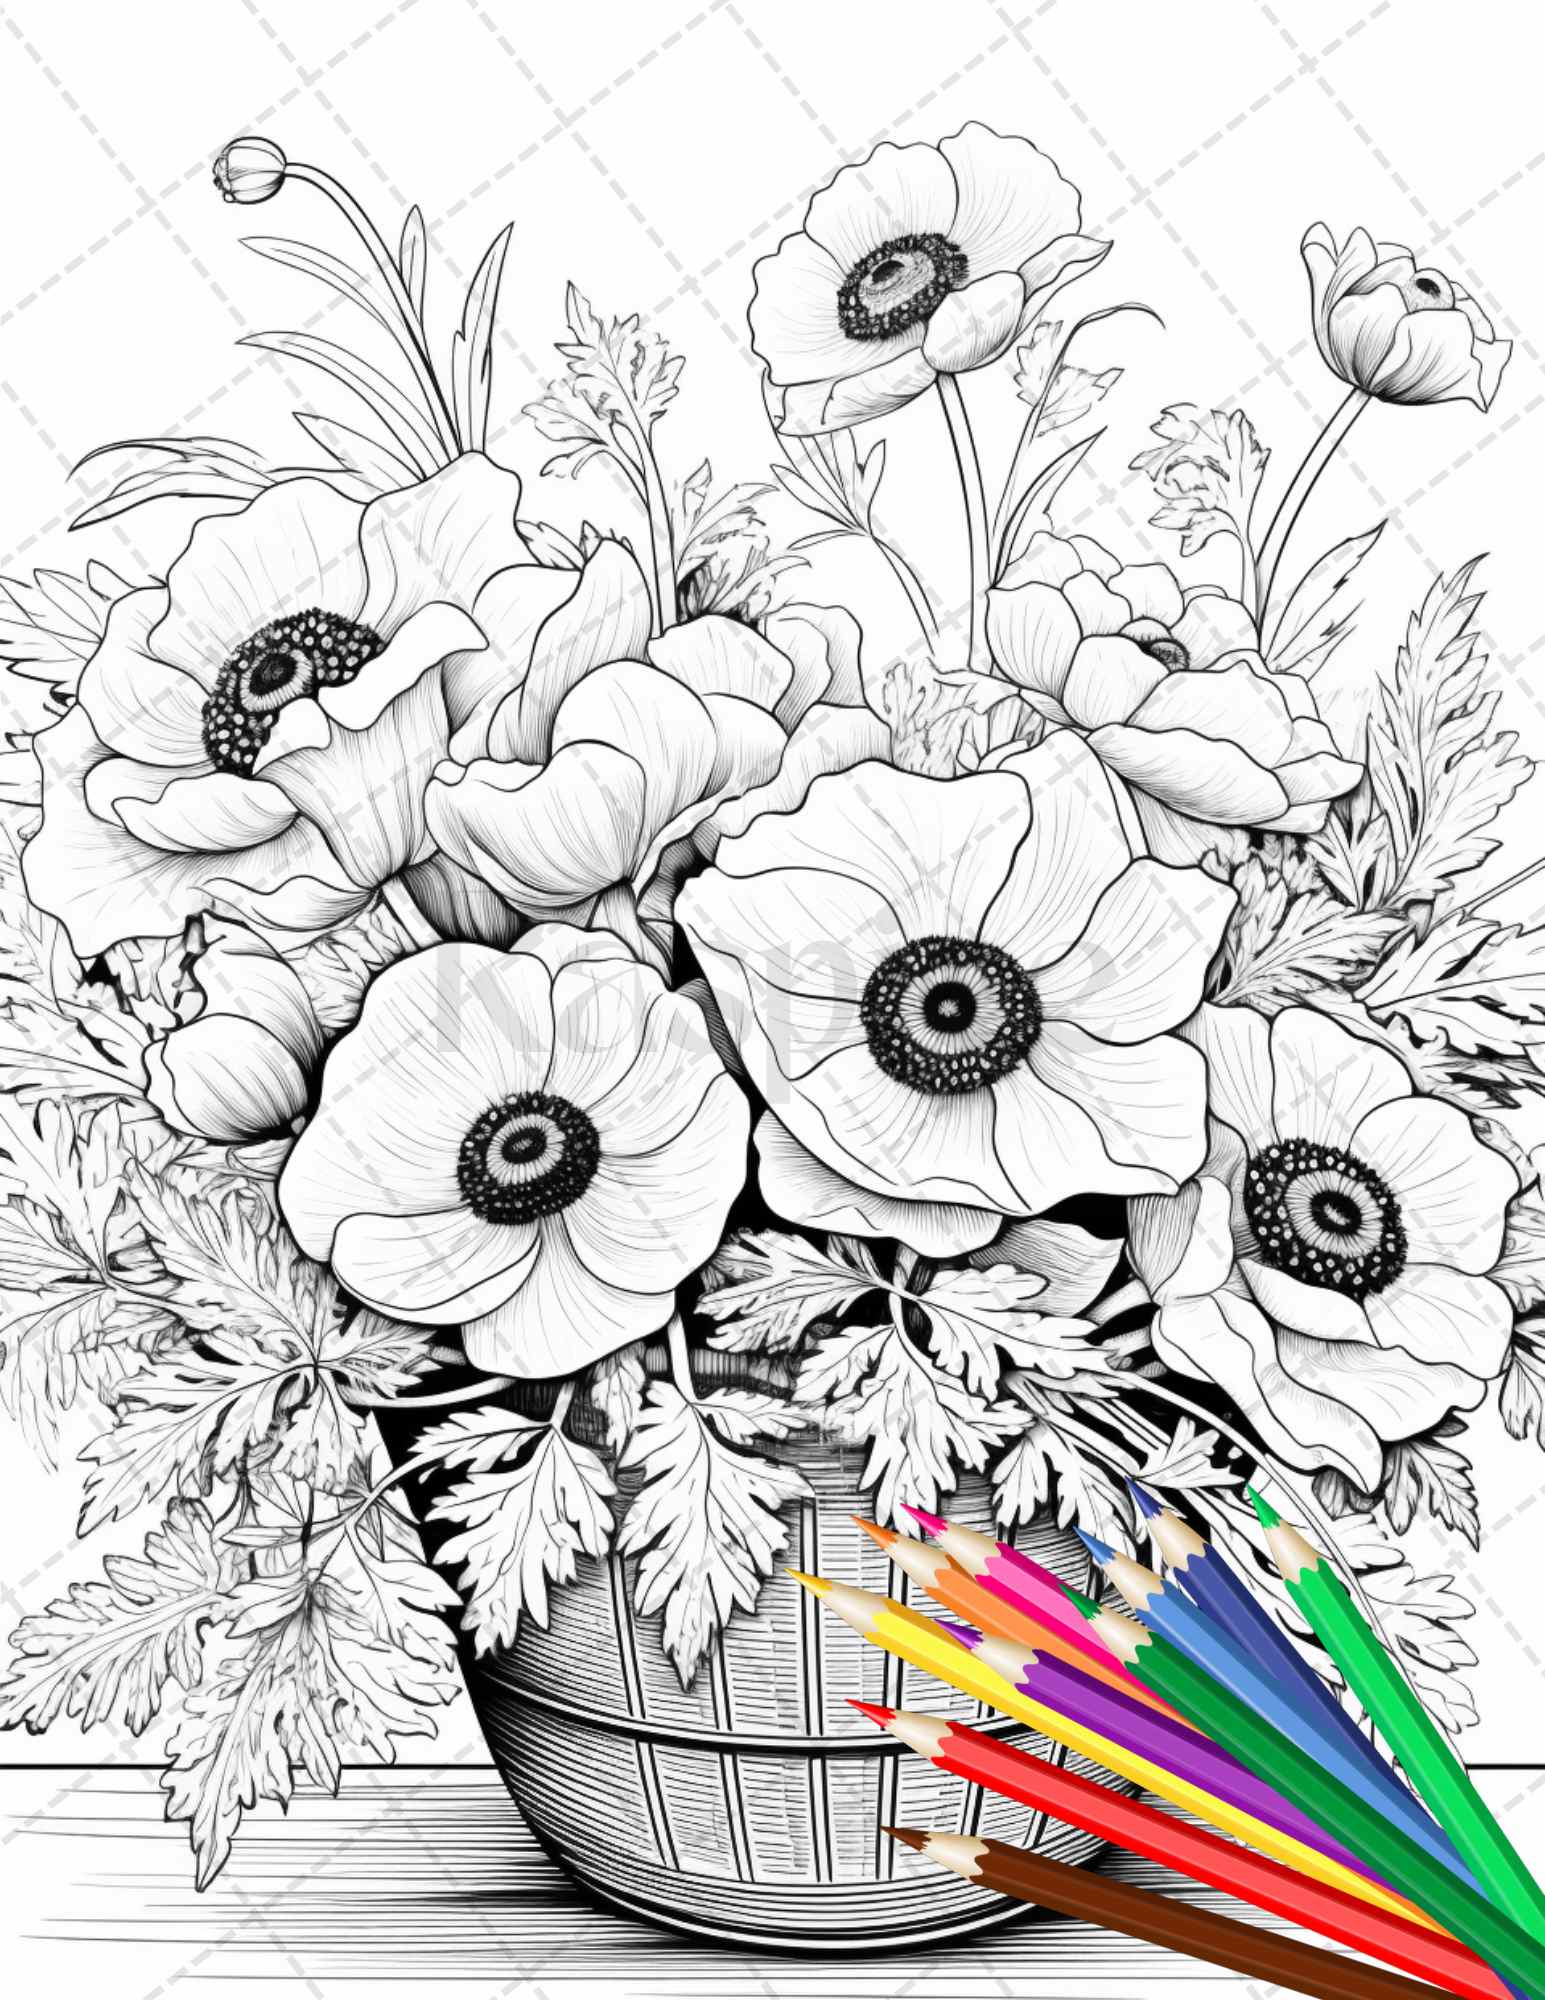 Flower baskets grayscale coloring pages for adults pdf file instan â coloring